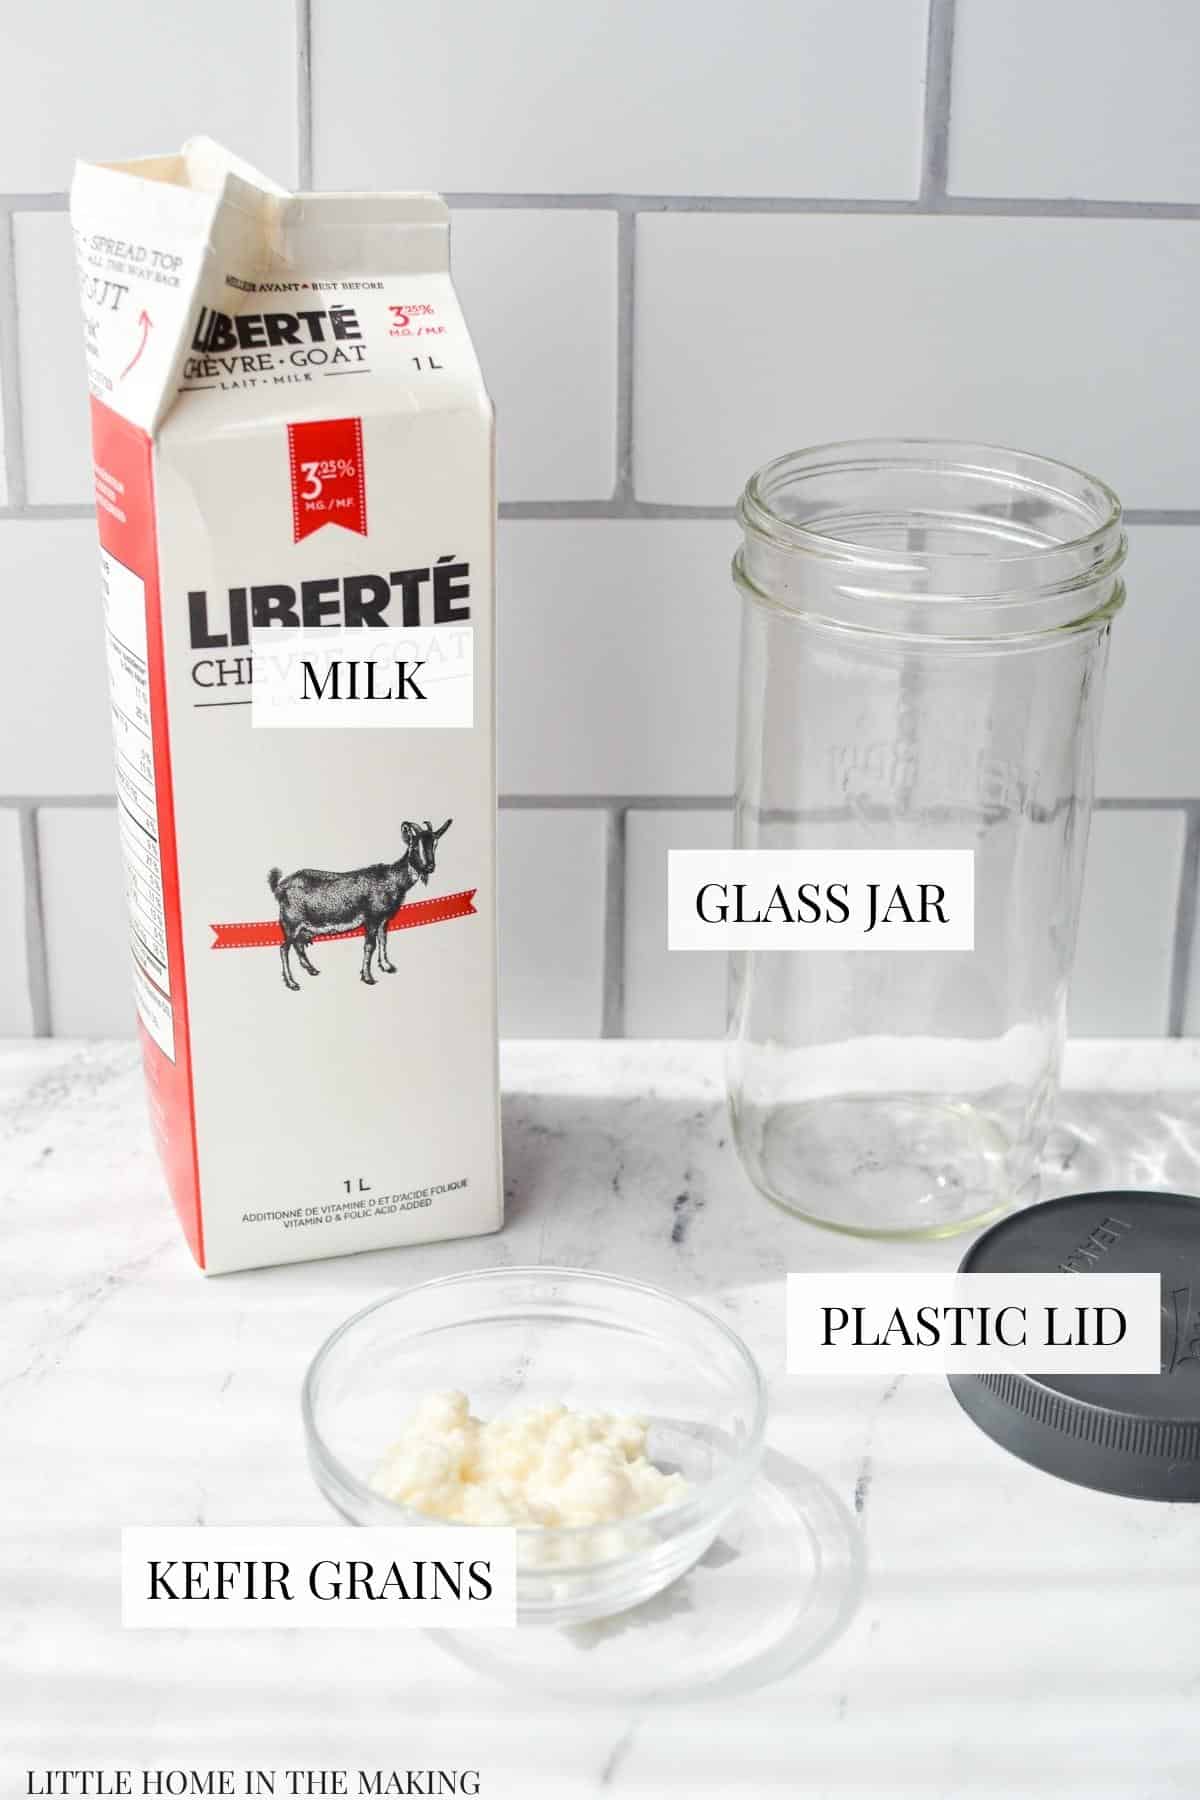 The ingredients needed to make kefir: milk, grains, a glass jar, and a lid.